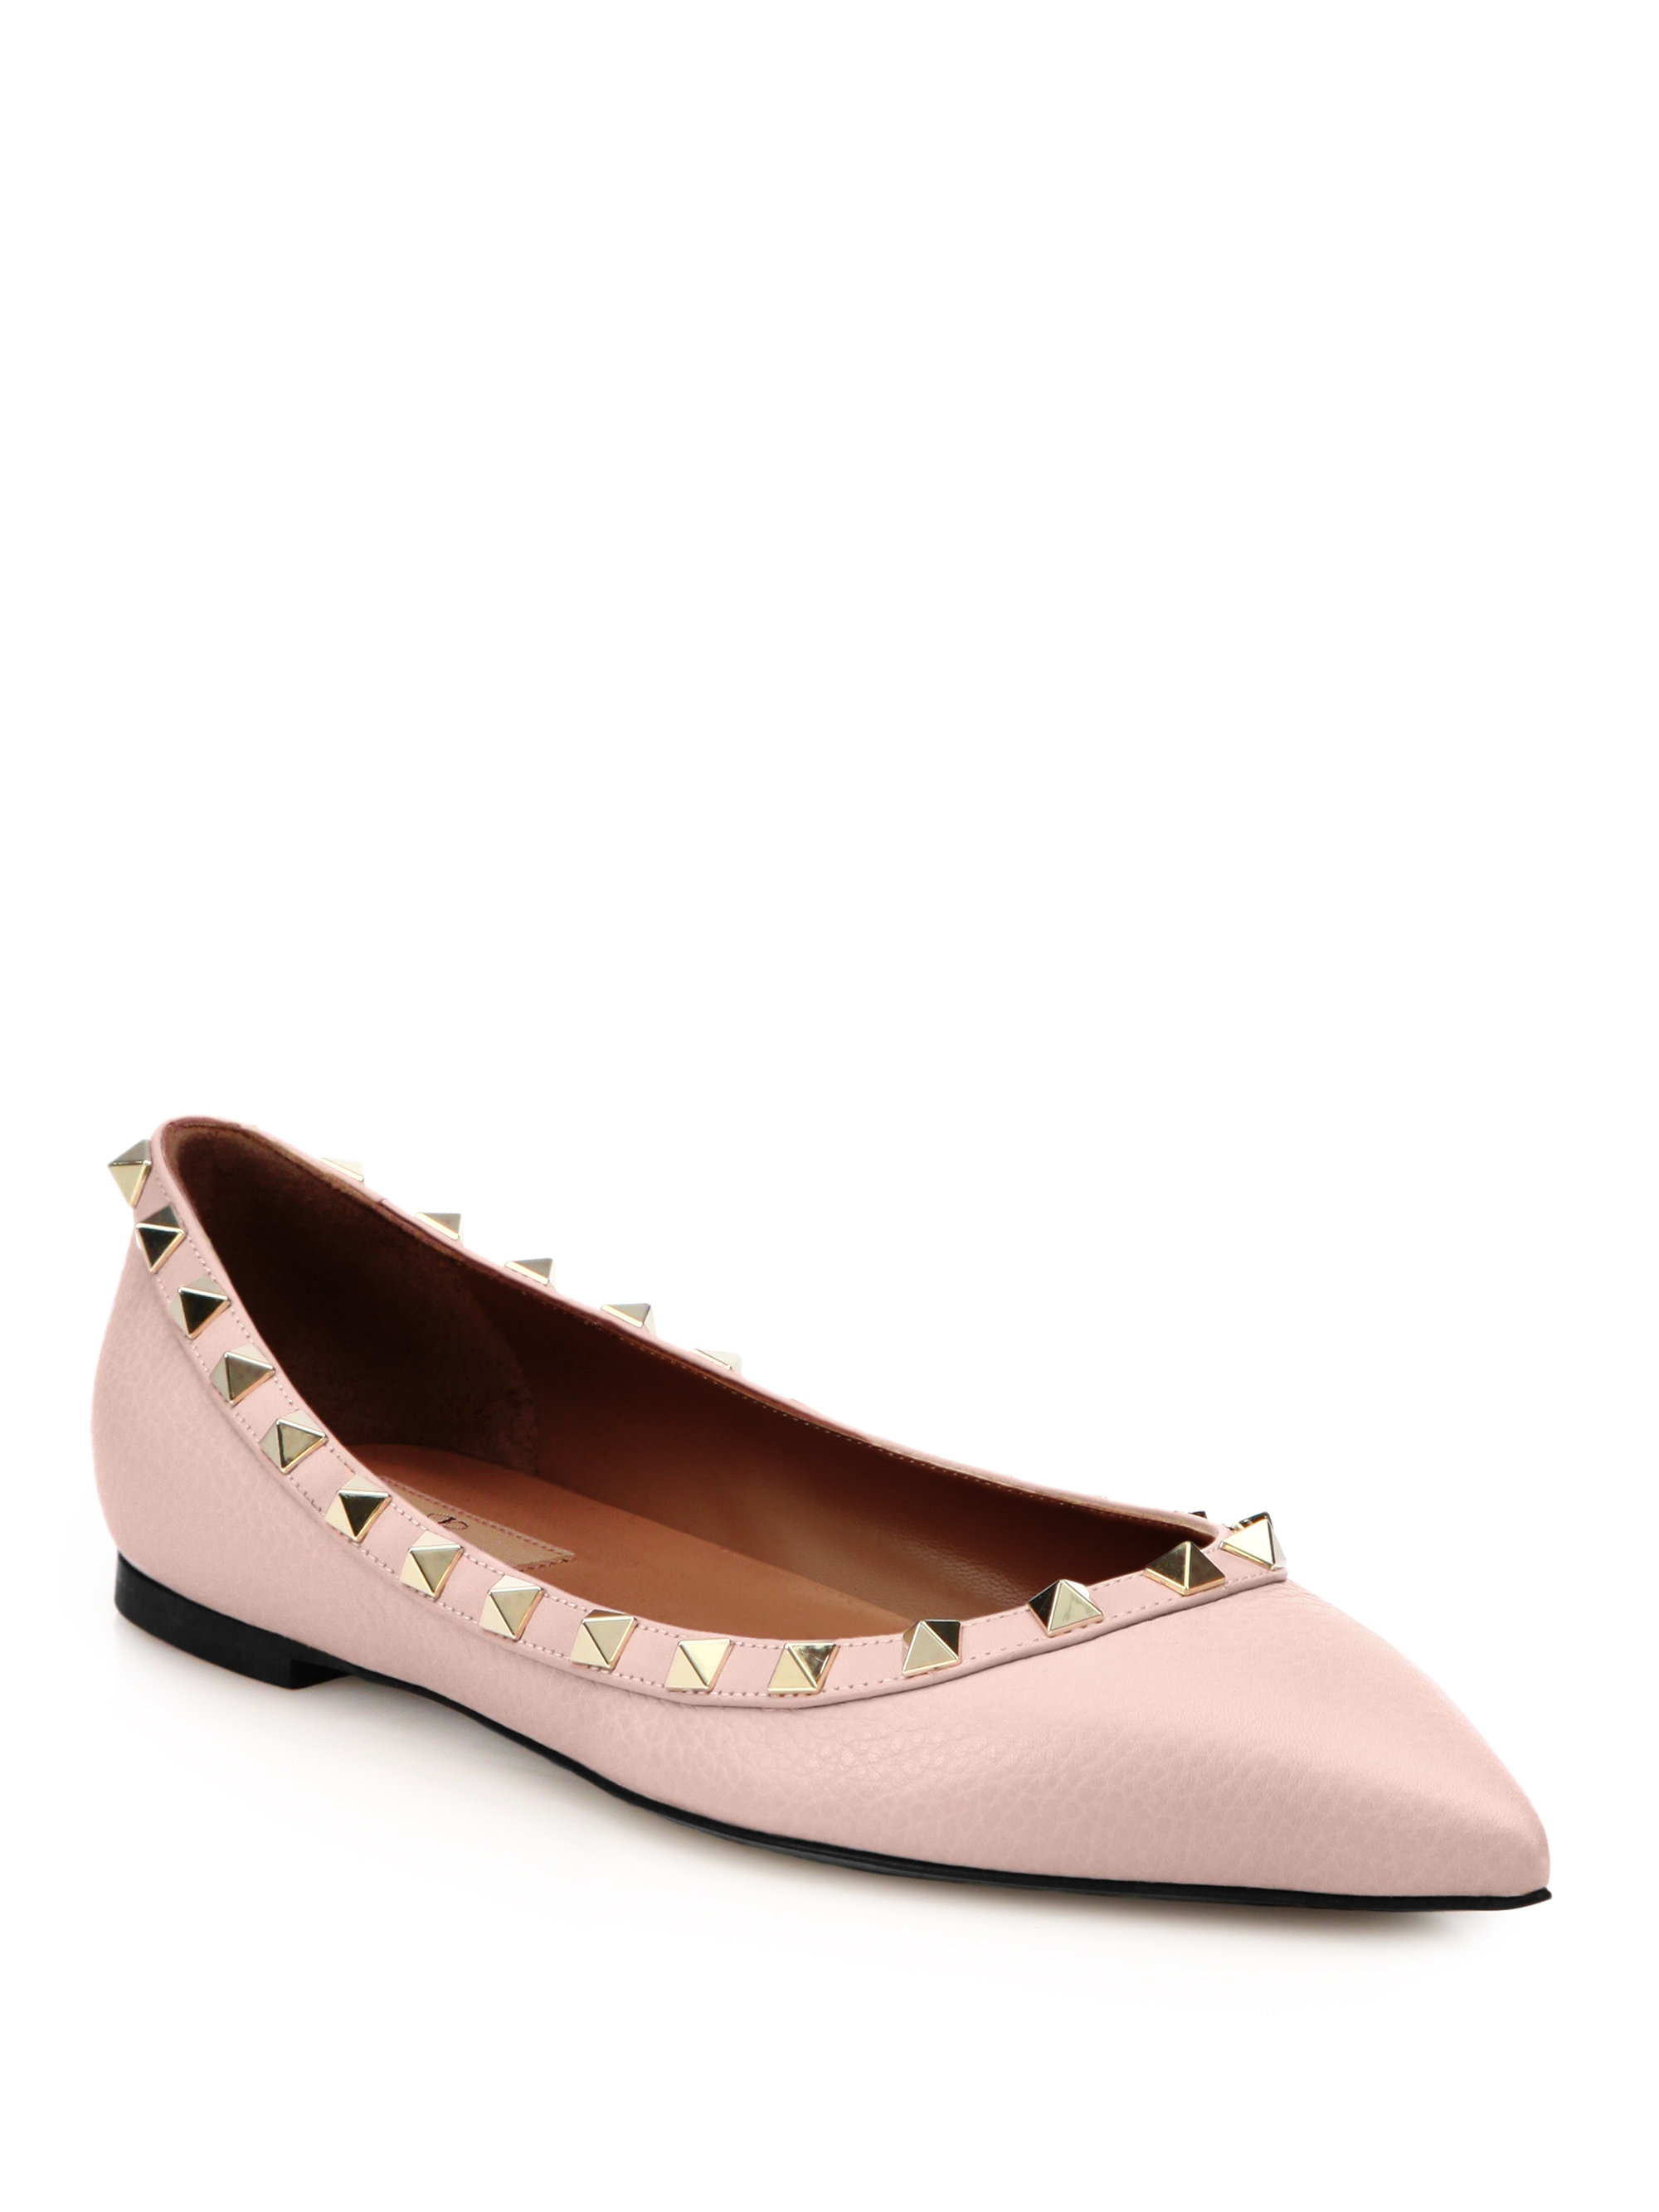 Valentino Rockstud Leather Ballet Flats in Pink | Lyst